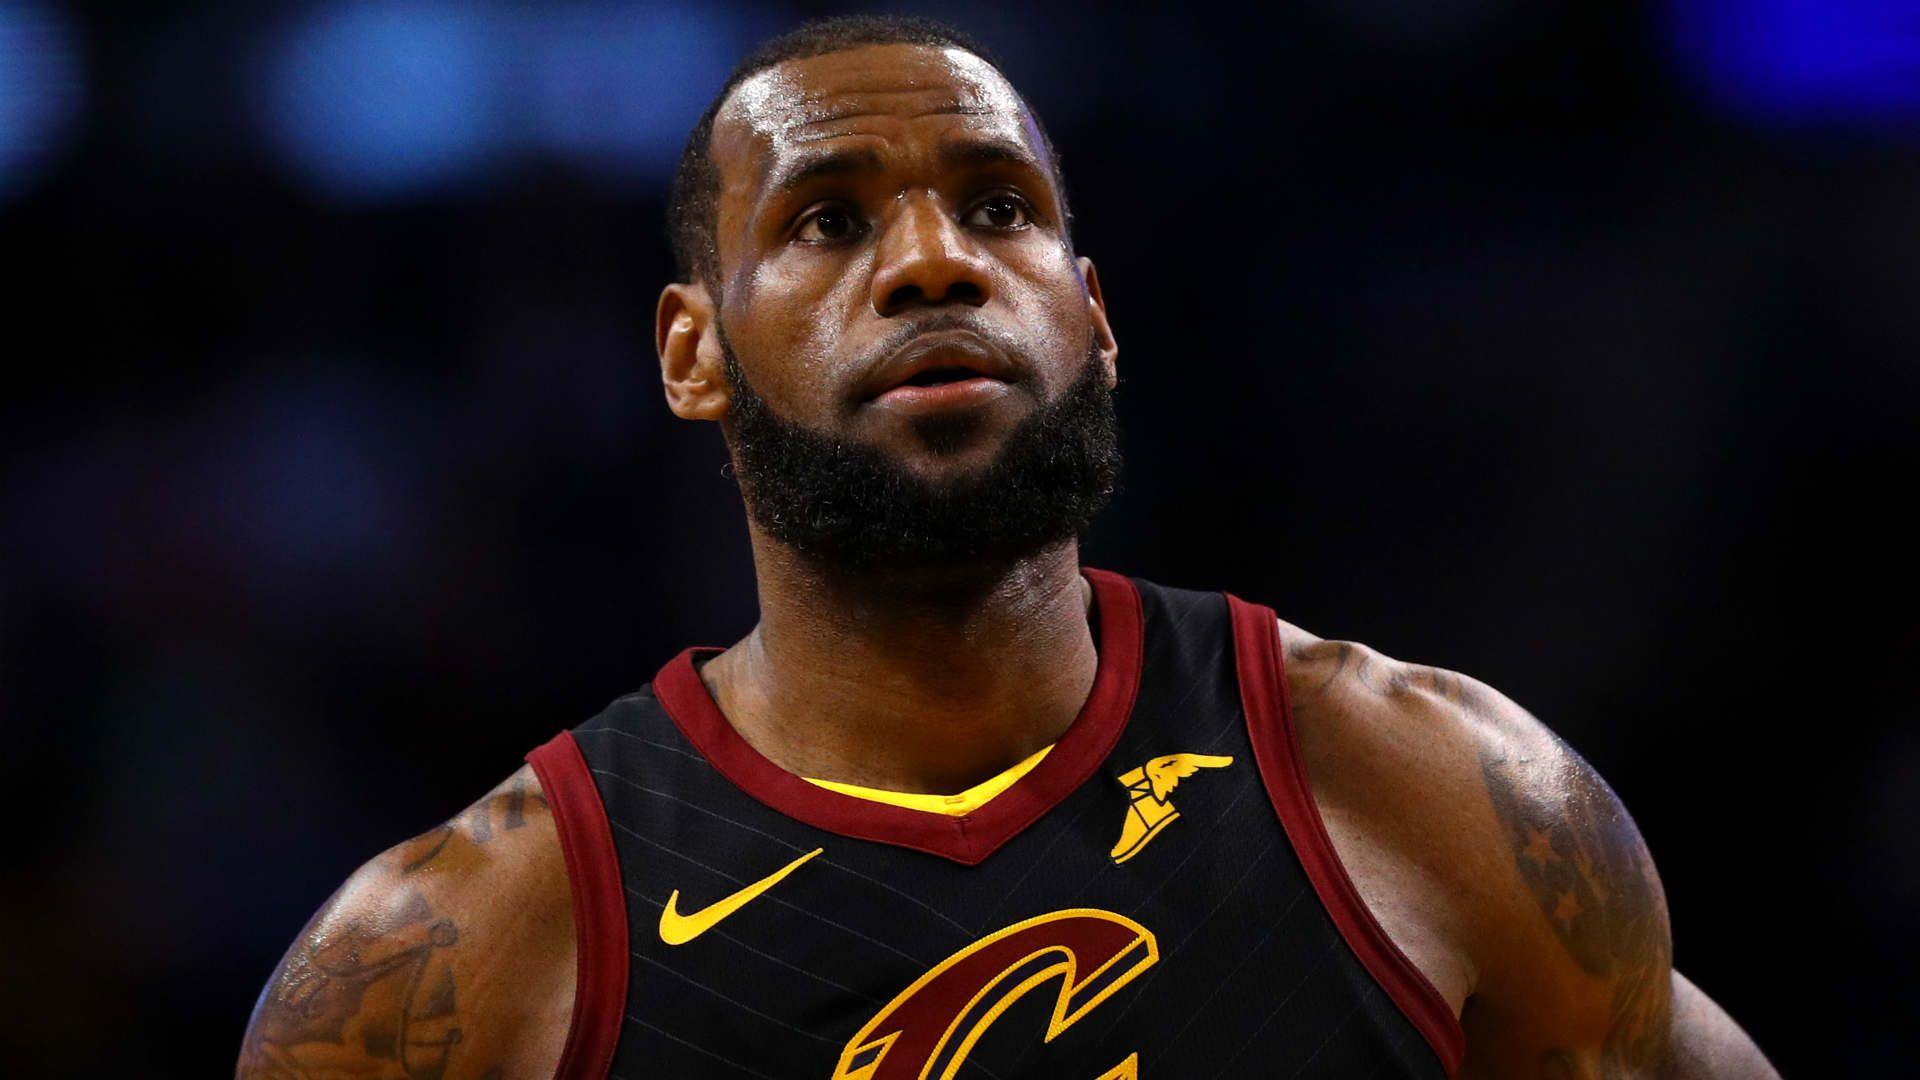 LeBron James on playoff outlook: 'We could easily get bounced early